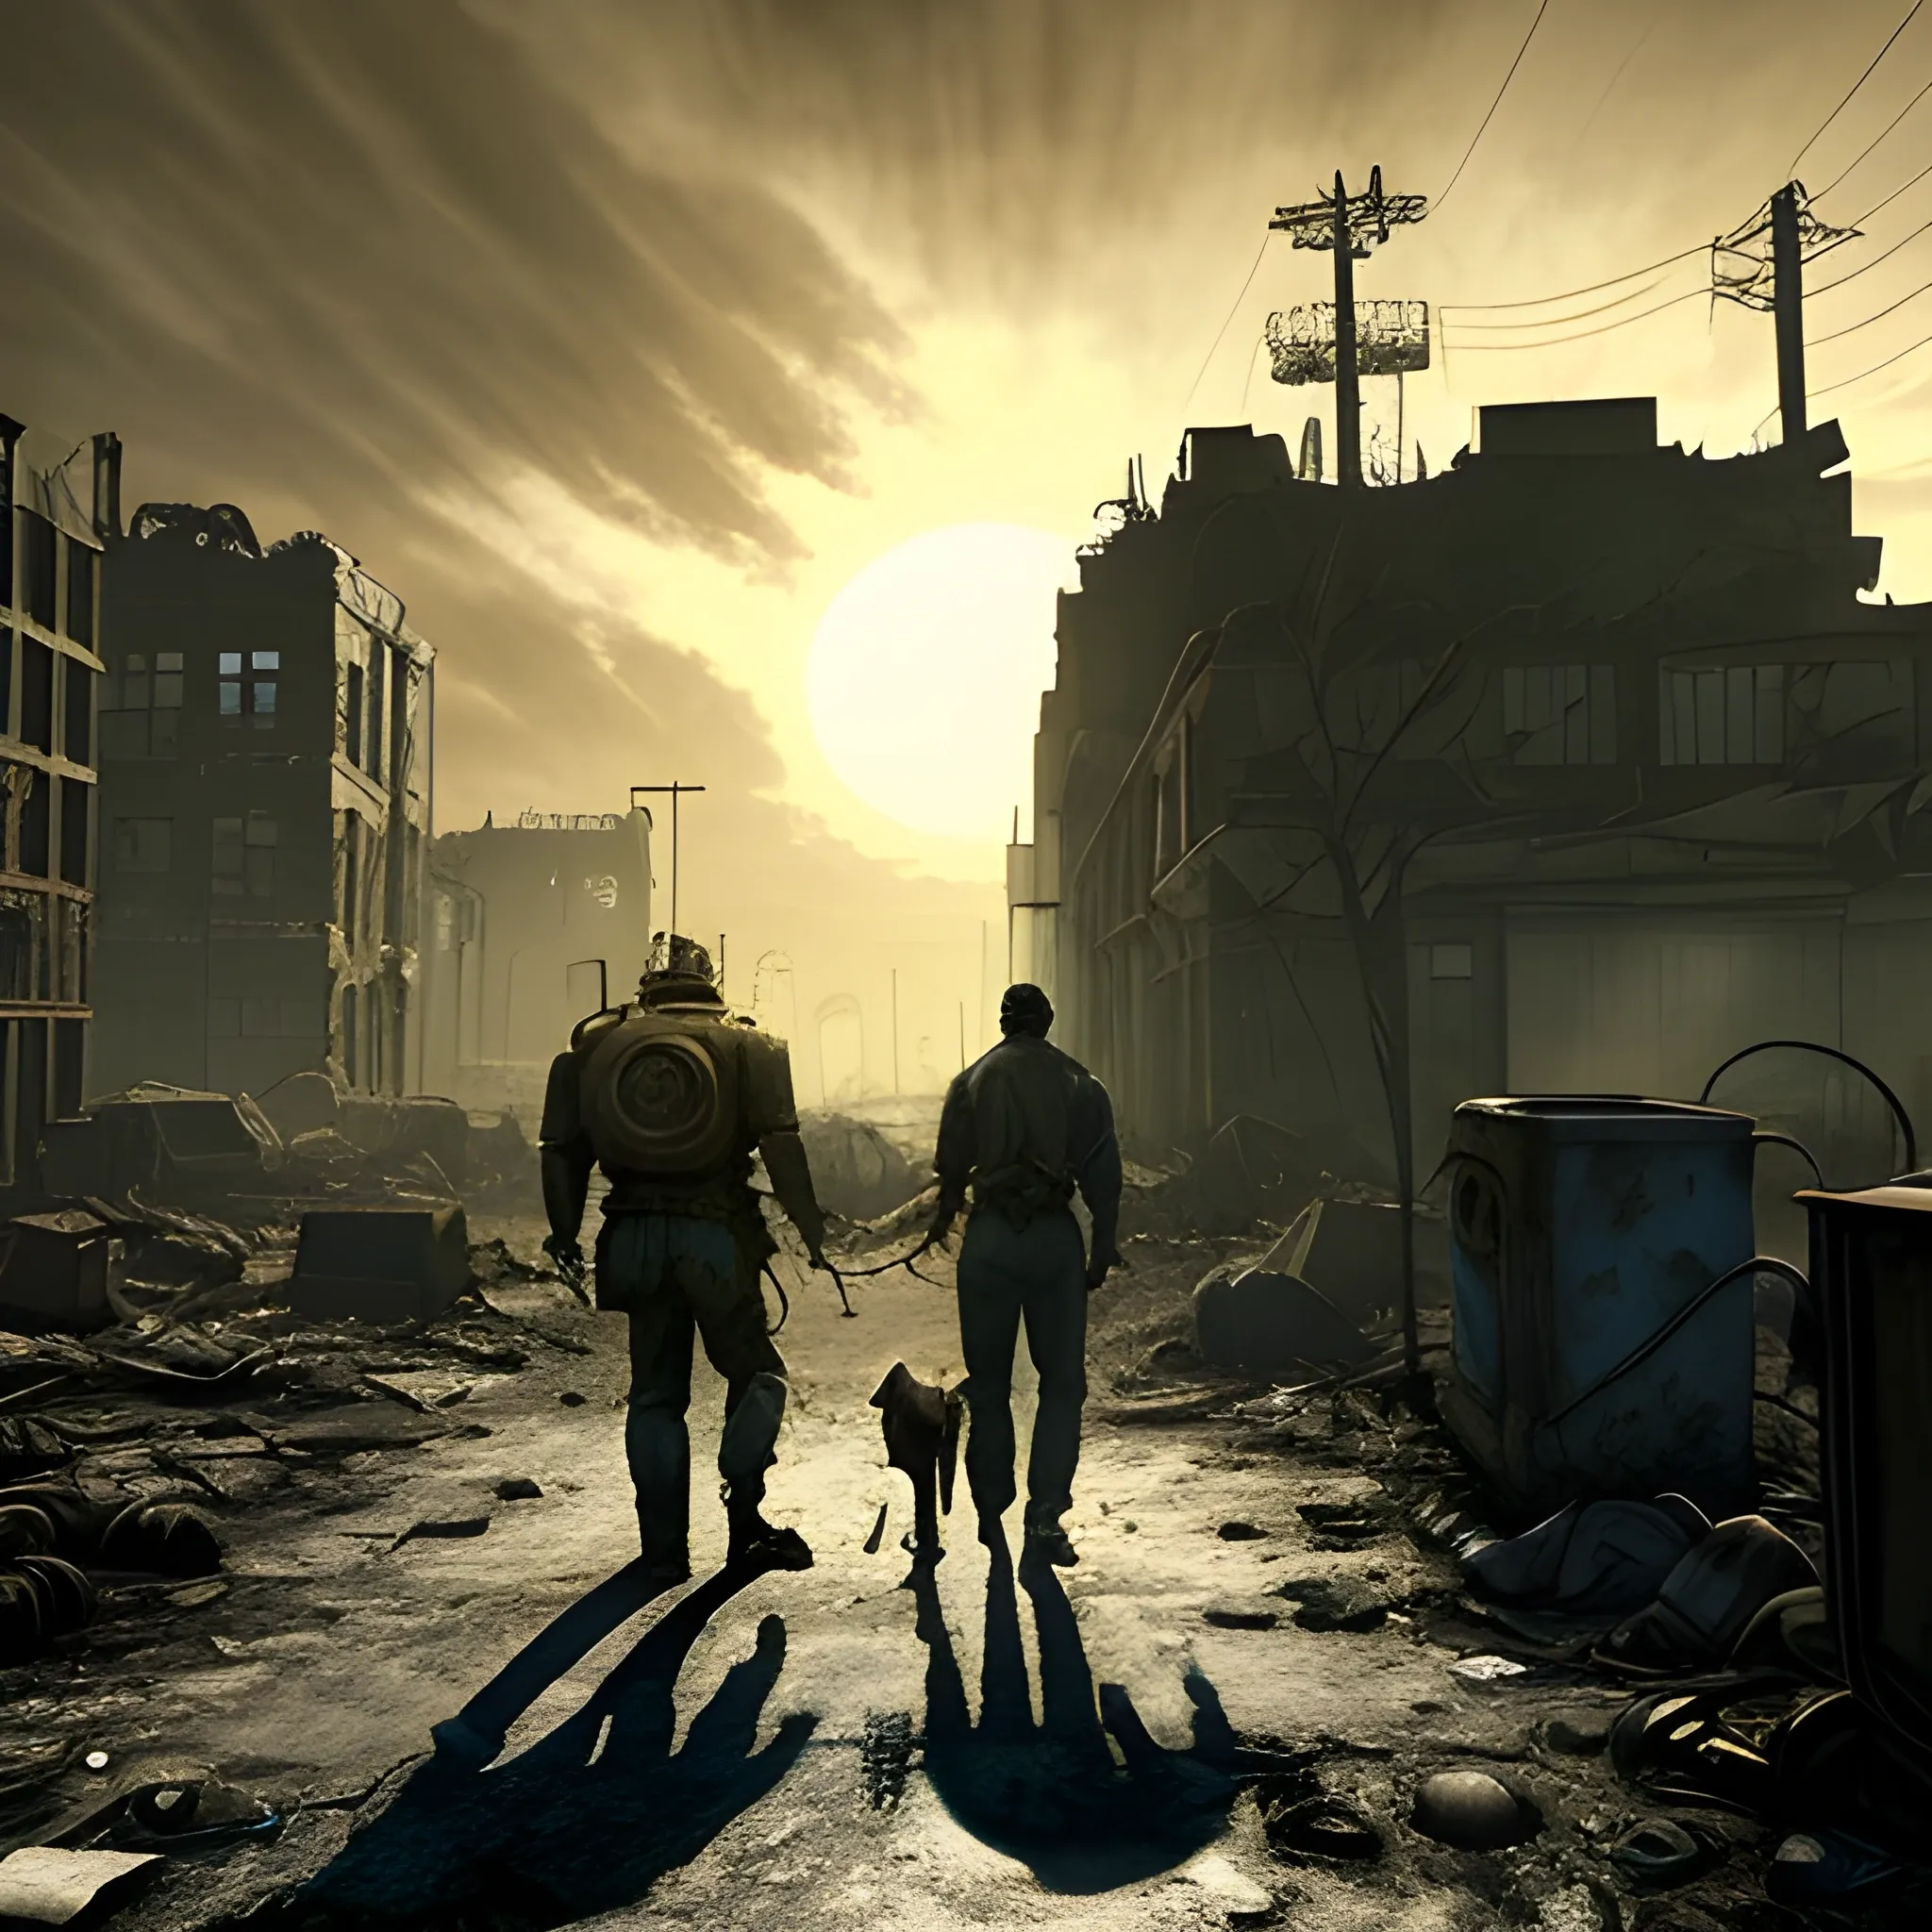 fallout 4,  a man and a dog walking towards the sun in a post-apocalyptic city,  "dark, gritty, desolate, abandoned, ruined buildings, distressed colors, dynamic angle, dusty, fire and smoke, gloomy atmosphere